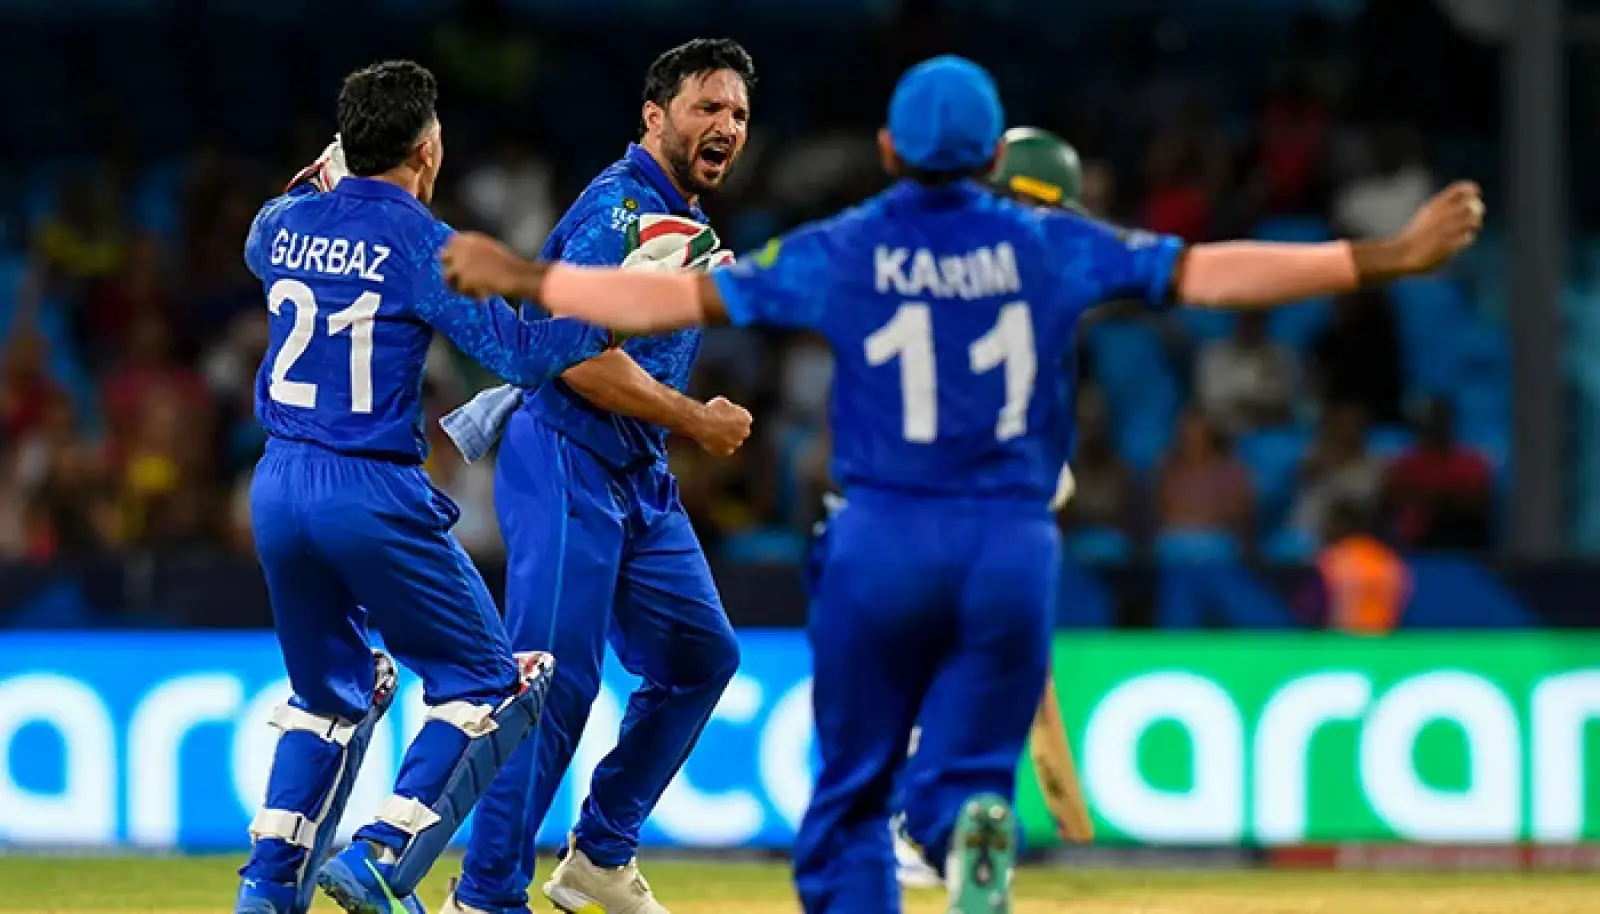 Afghanistan made the biggest upset in the T20 World Cup so far, defeated Australia by 21 runs